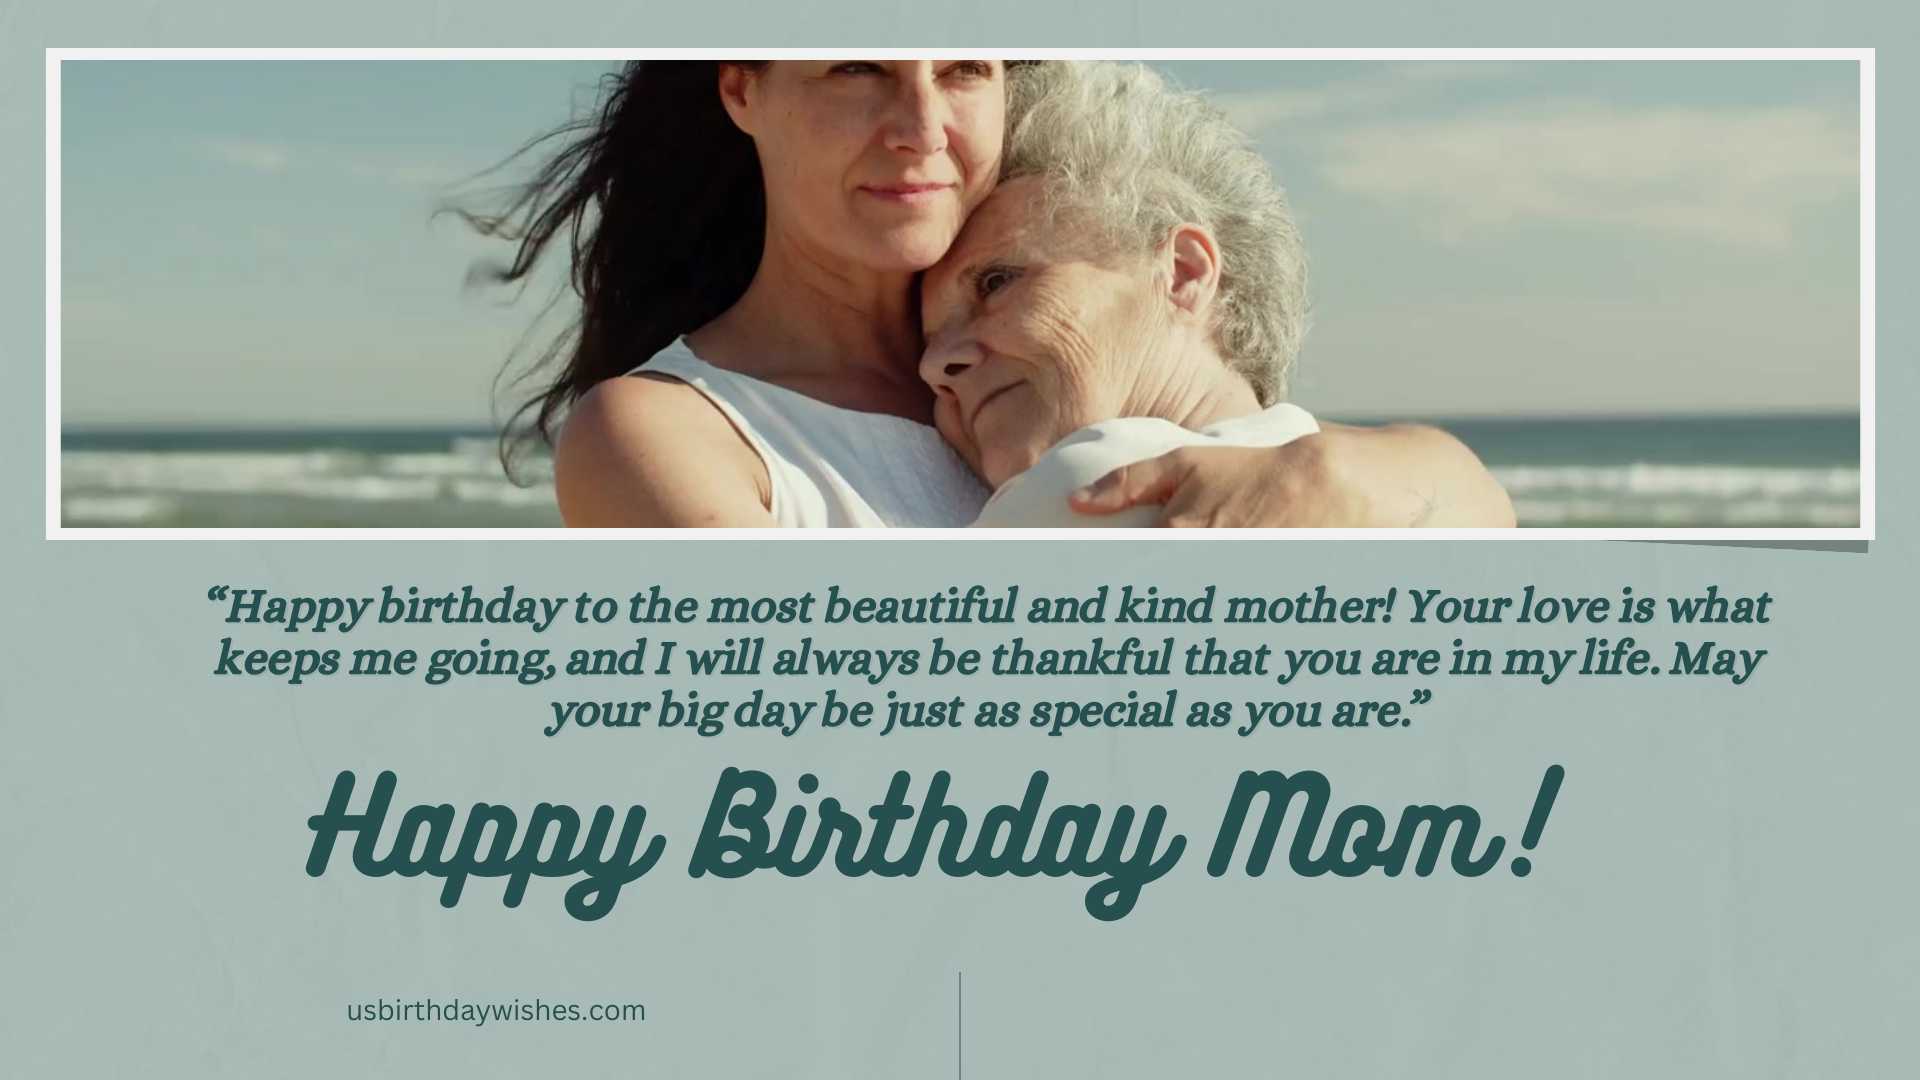 50+ Loving Birthday Wishes For Your Mom To Make Her Day Special